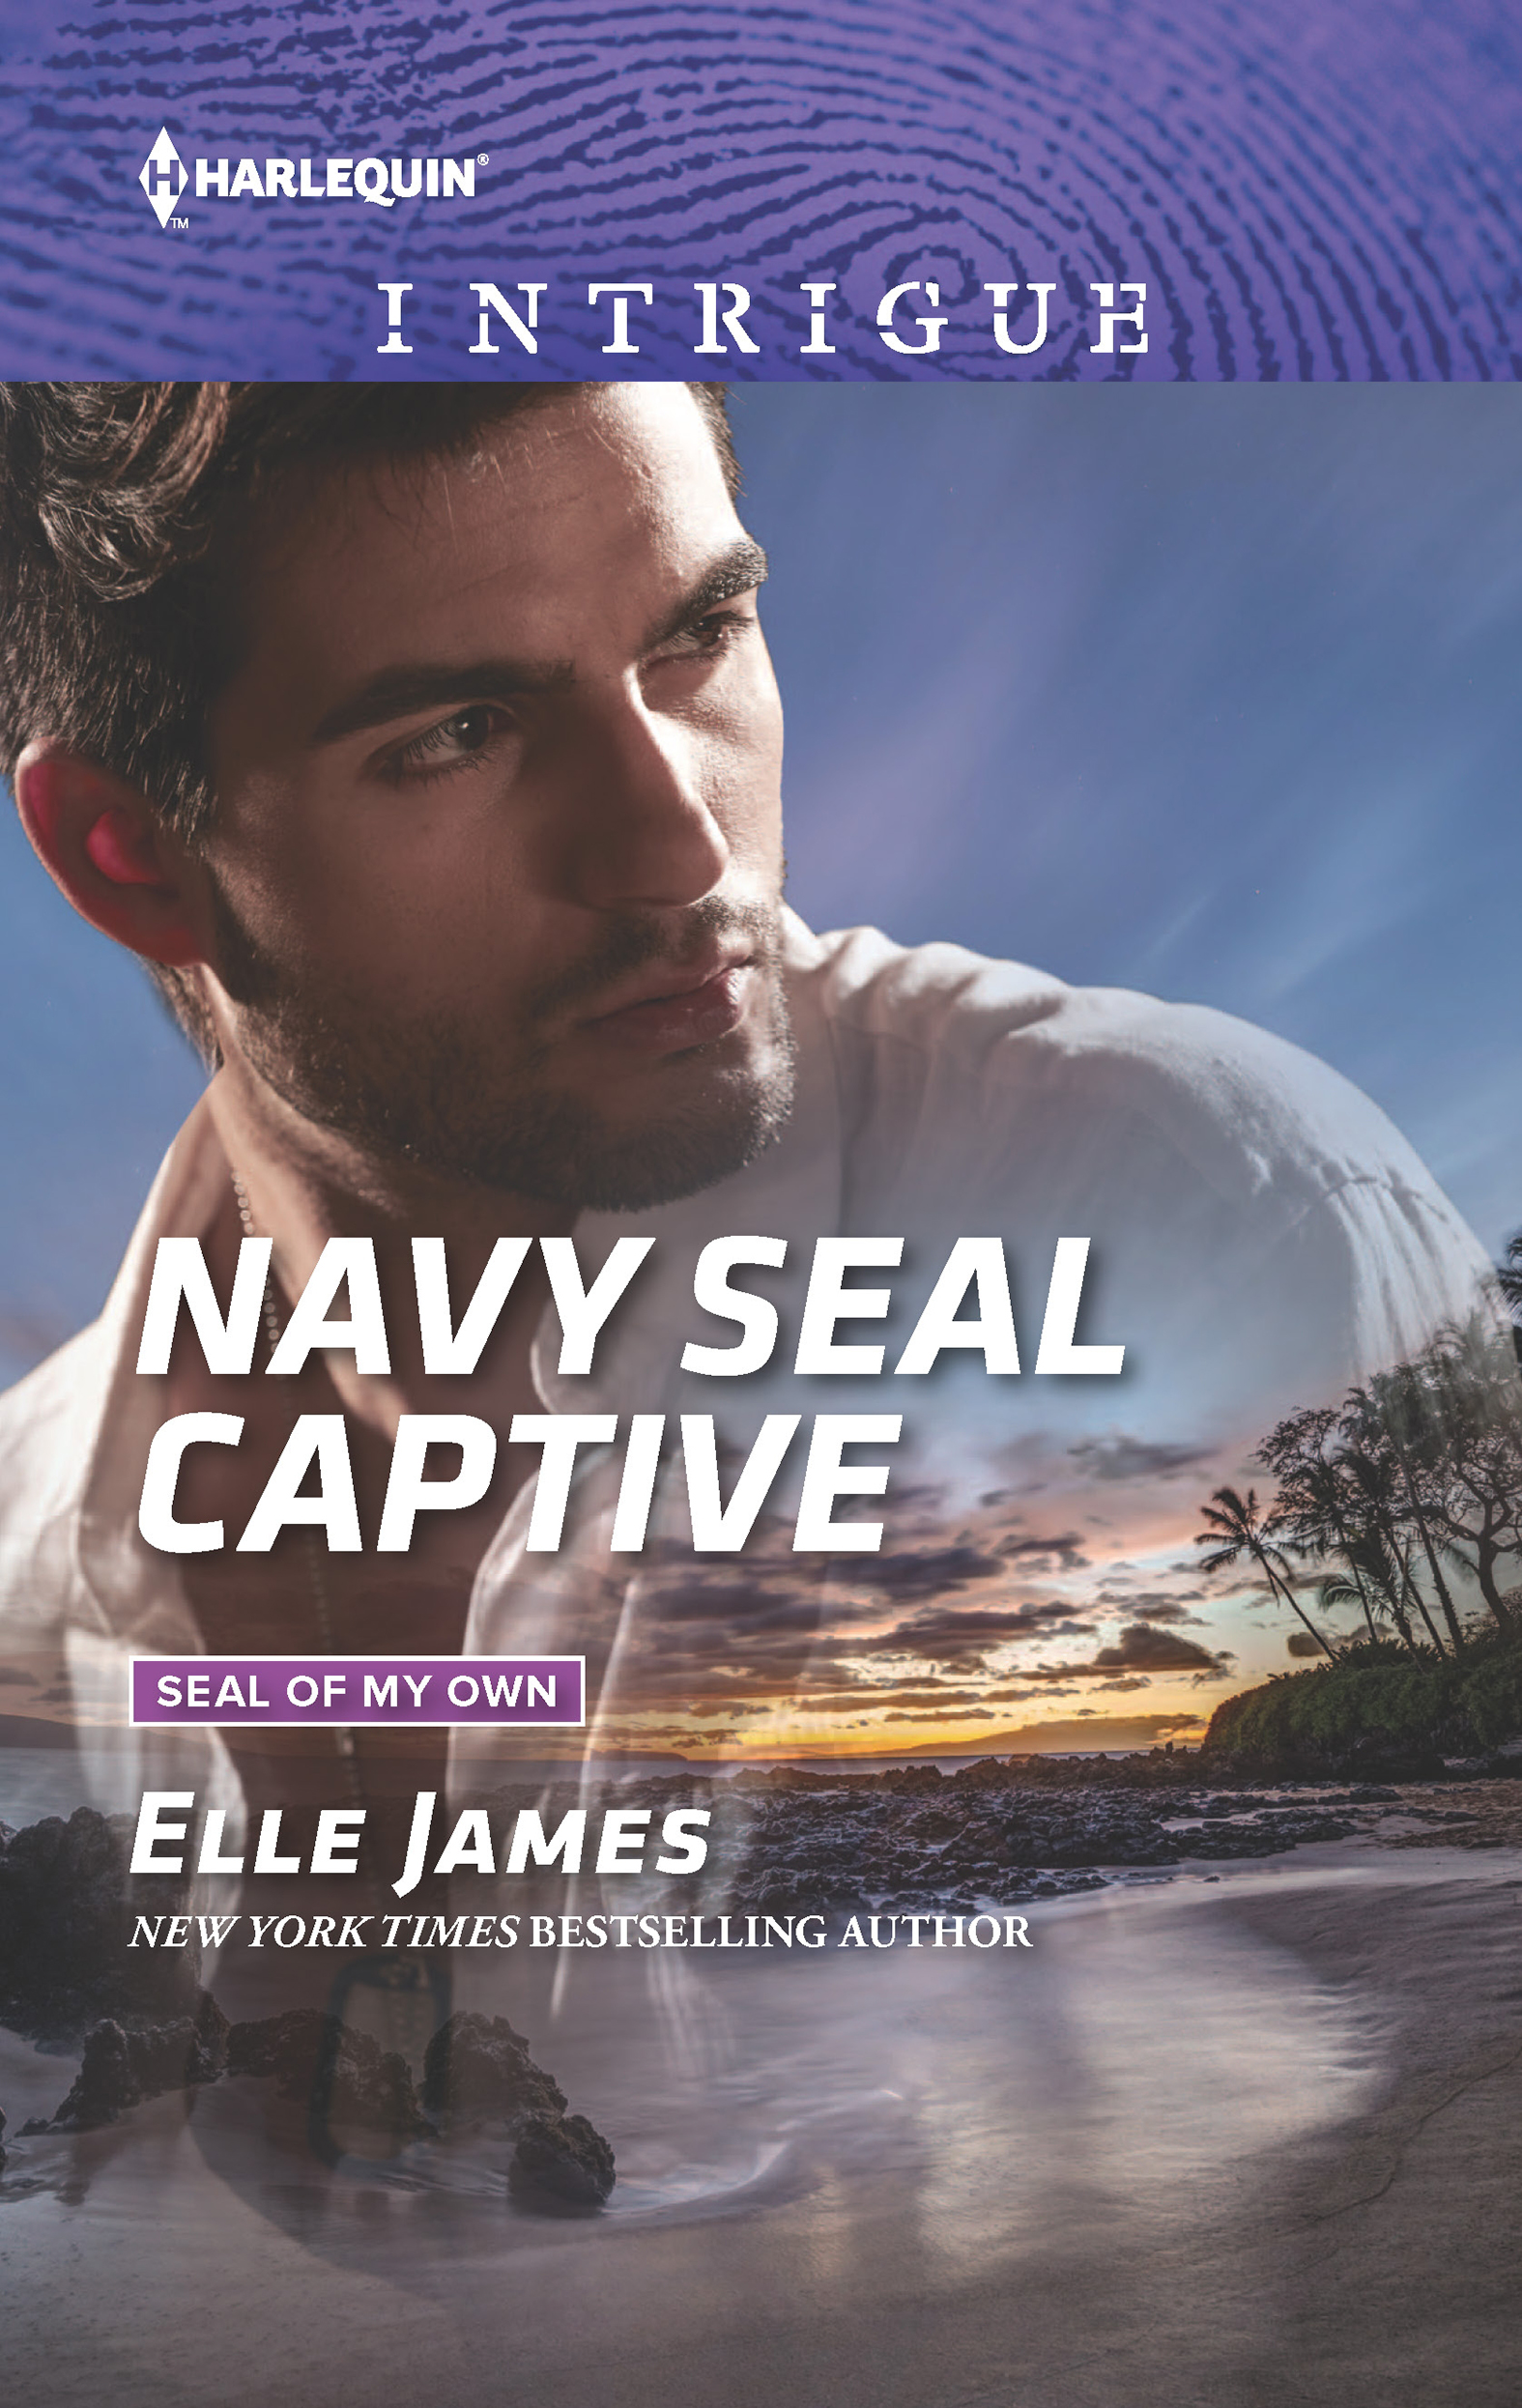 Navy SEAL Captive (2016) by Elle James